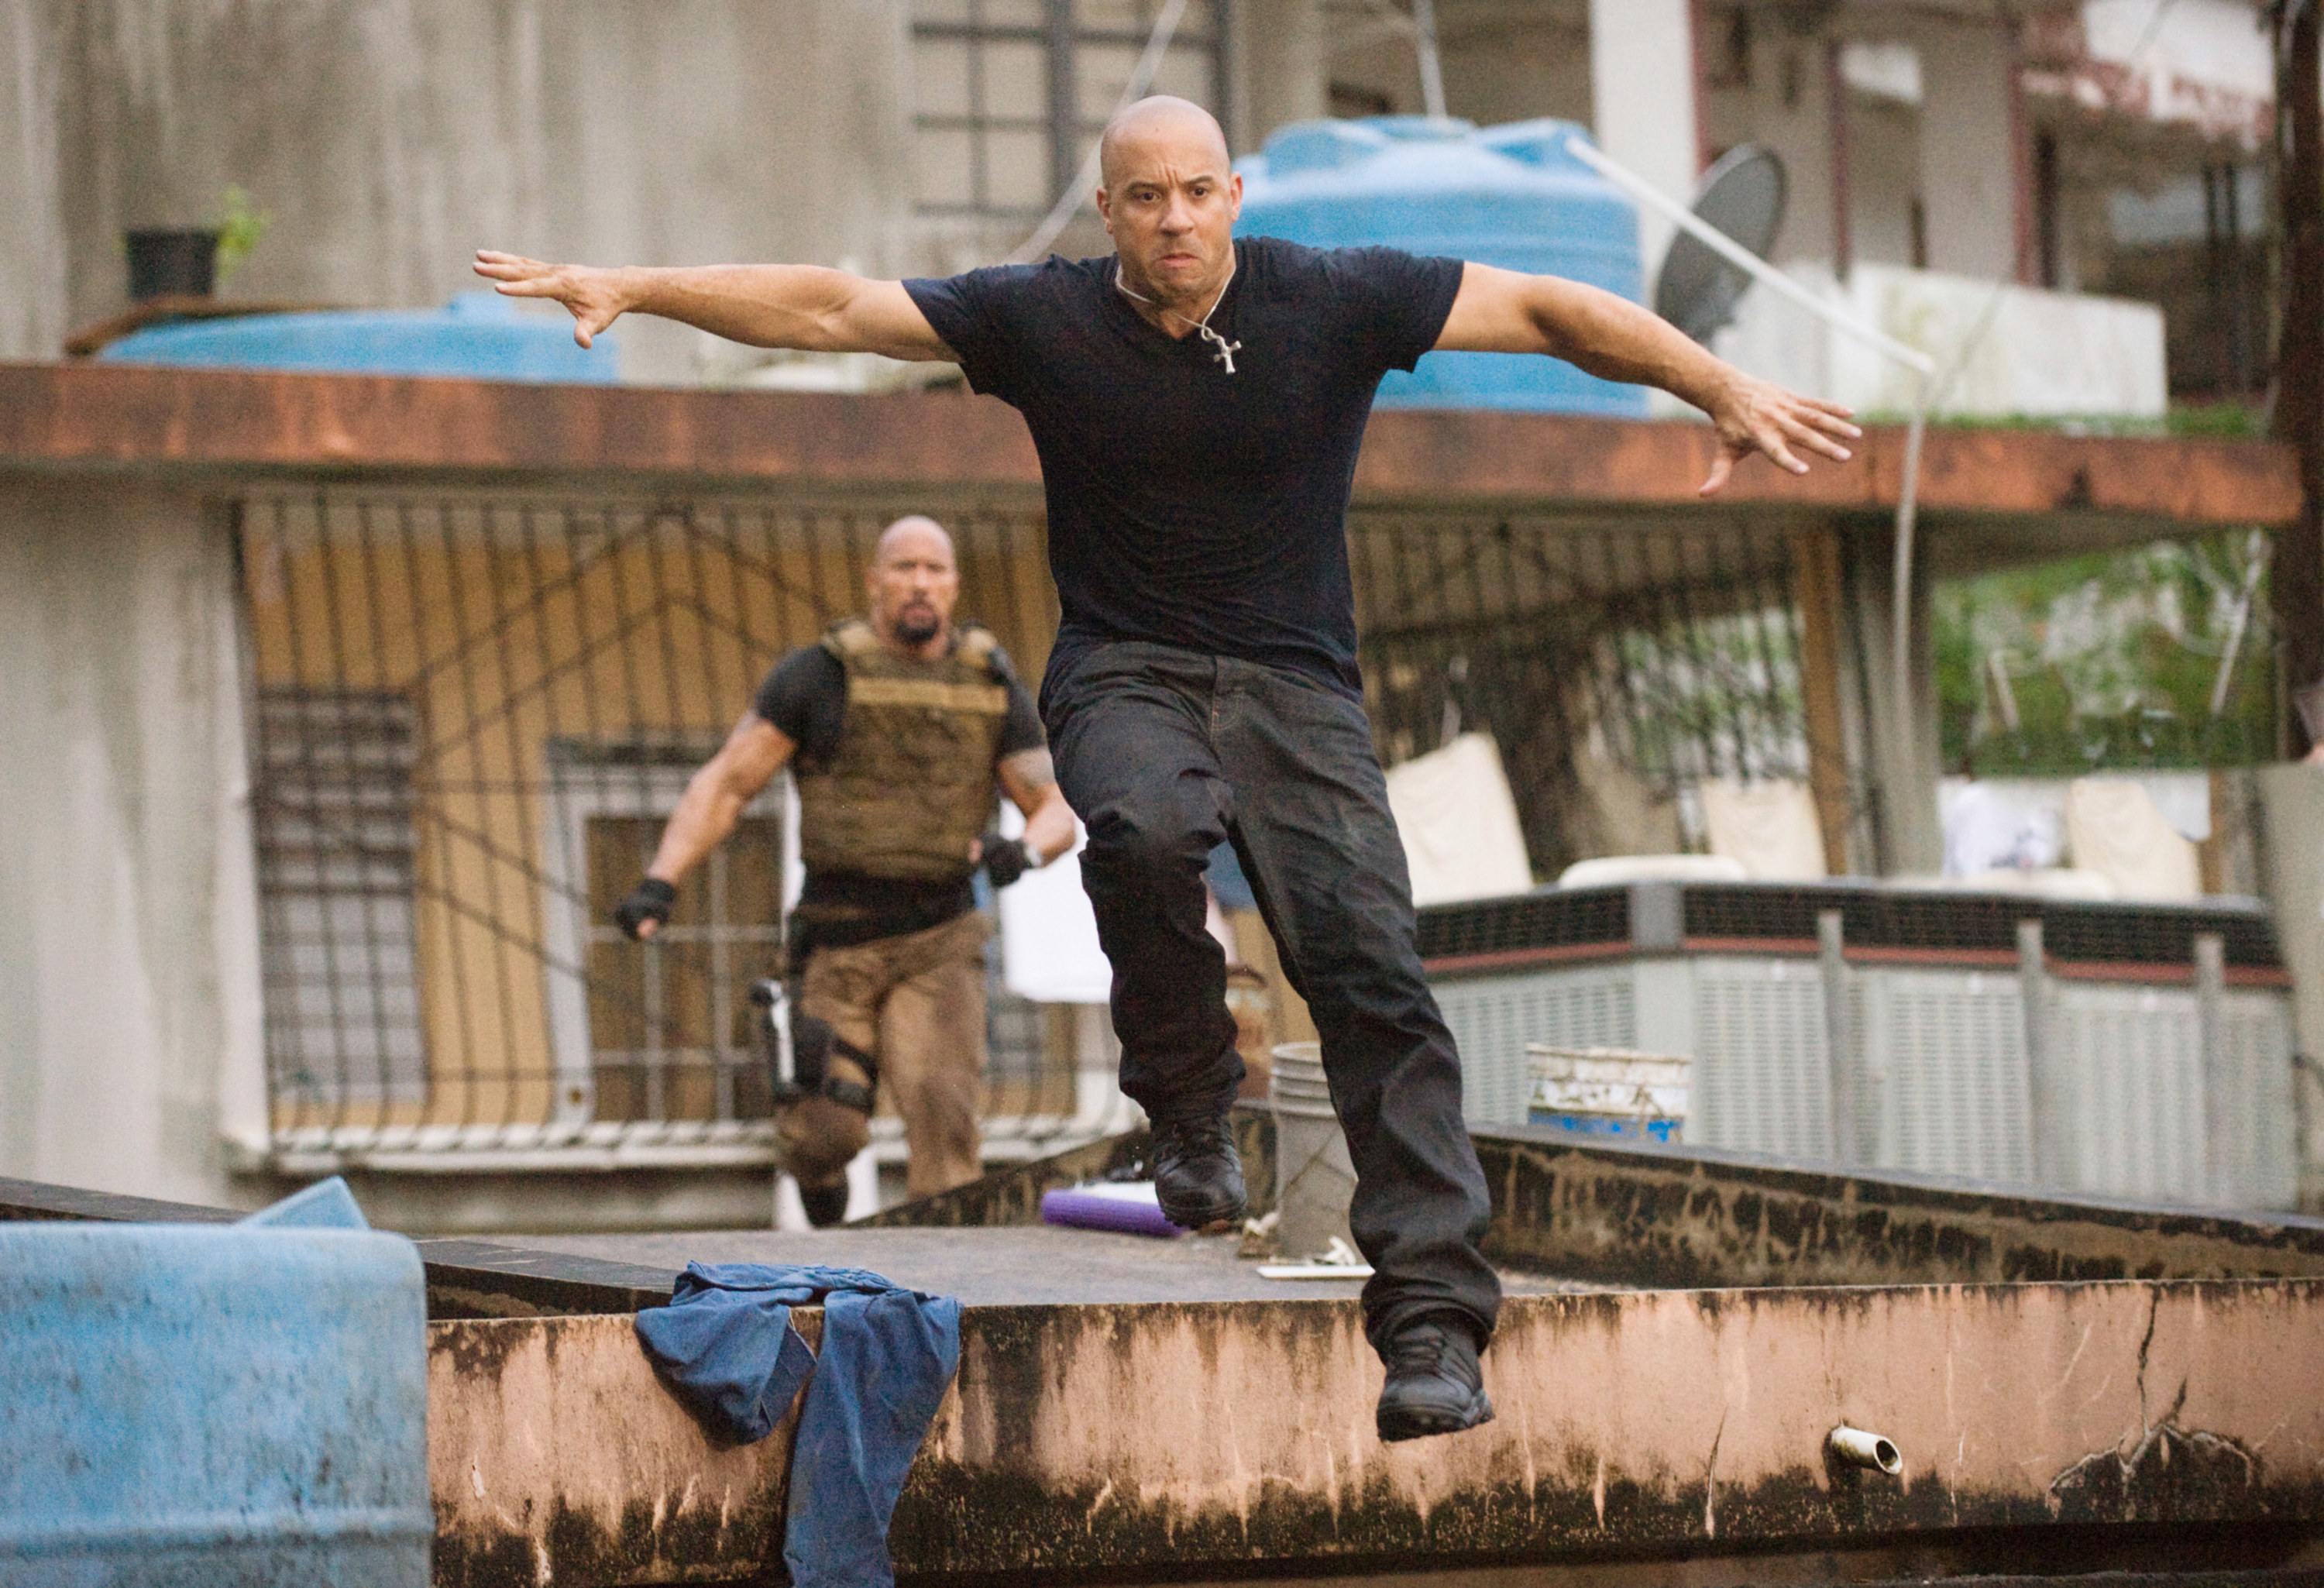 Vin jumps off the edge of a building while Dwayne chases him